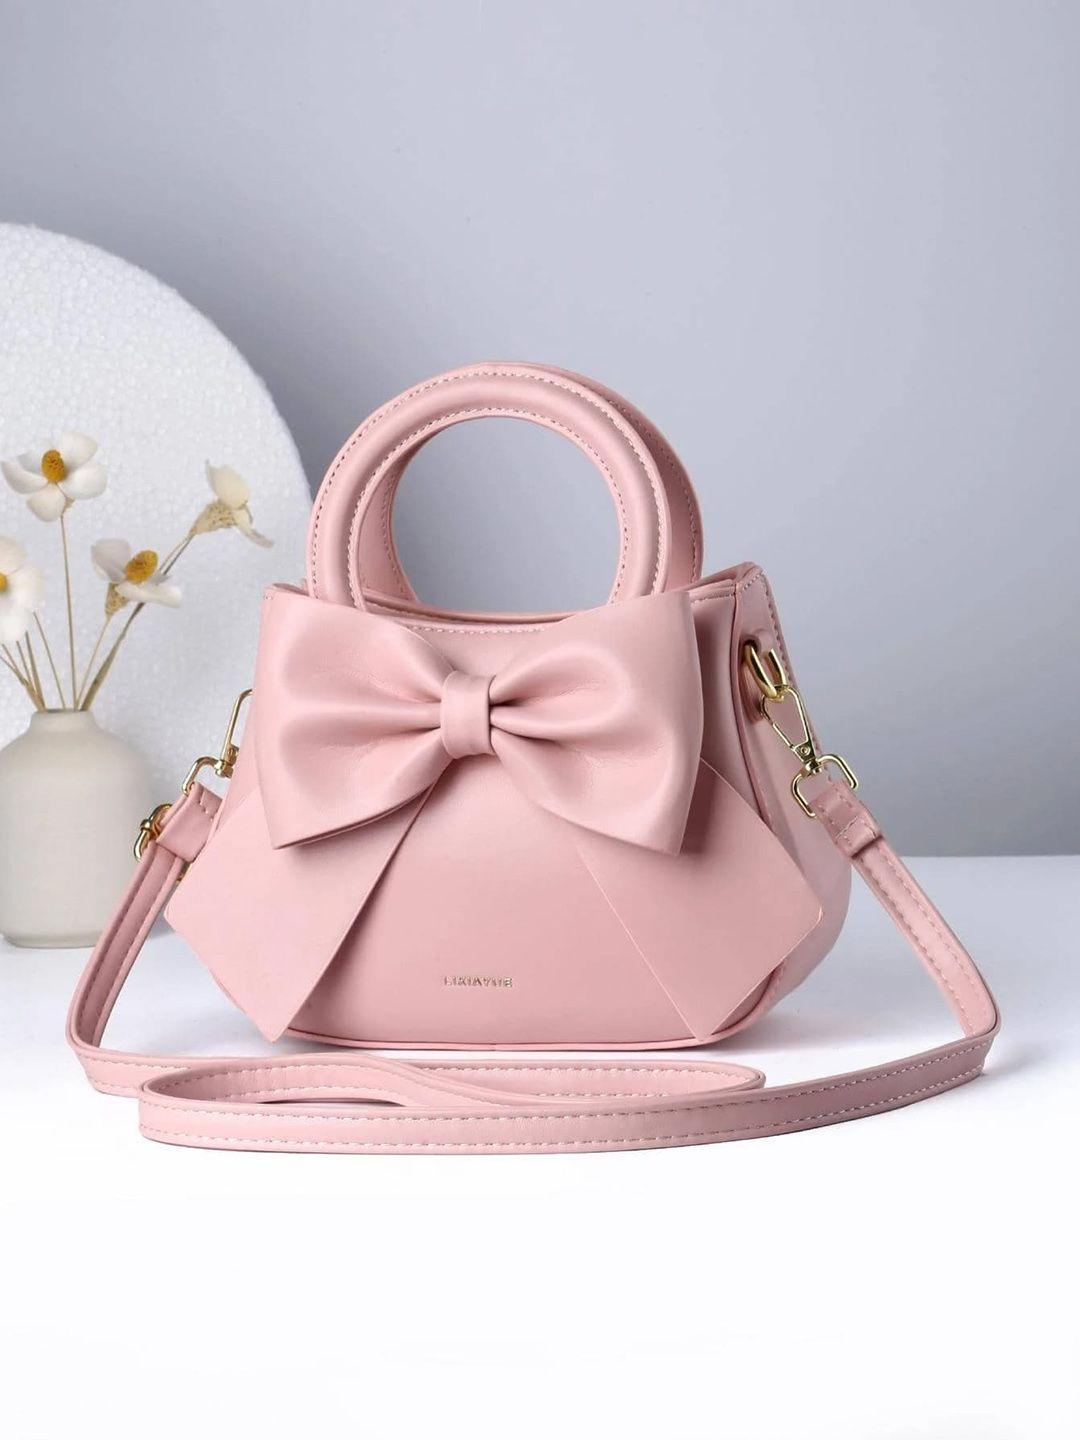 syga leather bucket handheld bag with bow detail